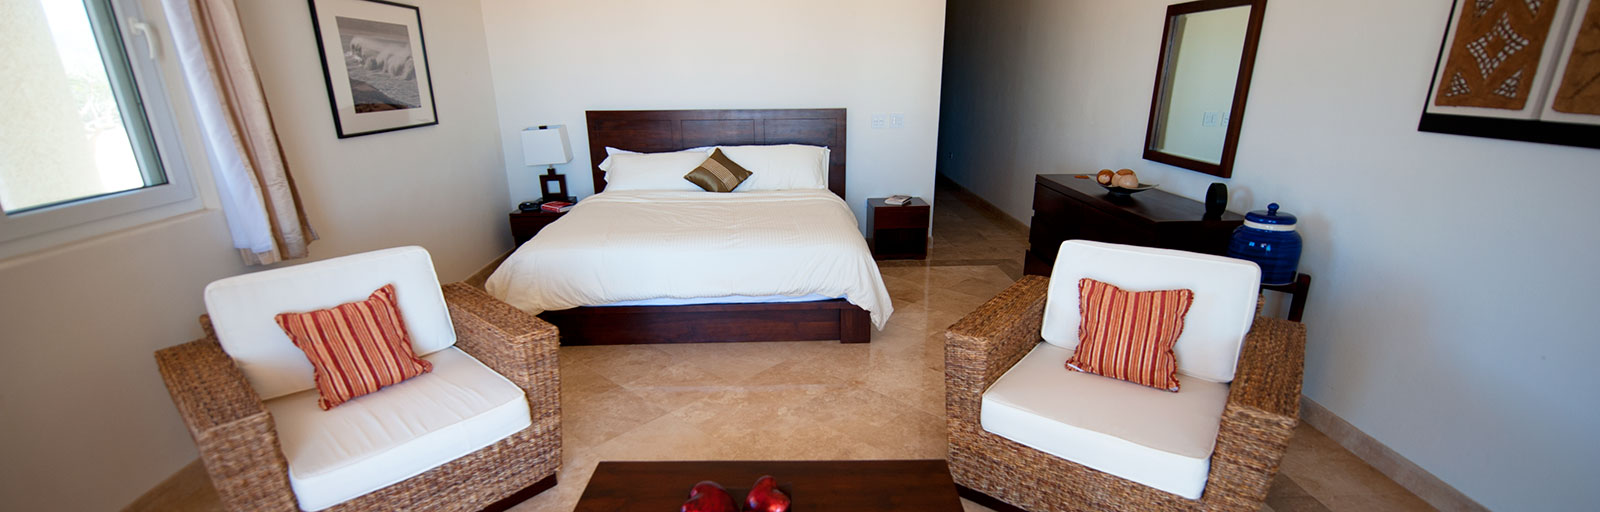 Mexico Yoga Retreat Center in Baja: Spacious, Luxurious Guest Rooms